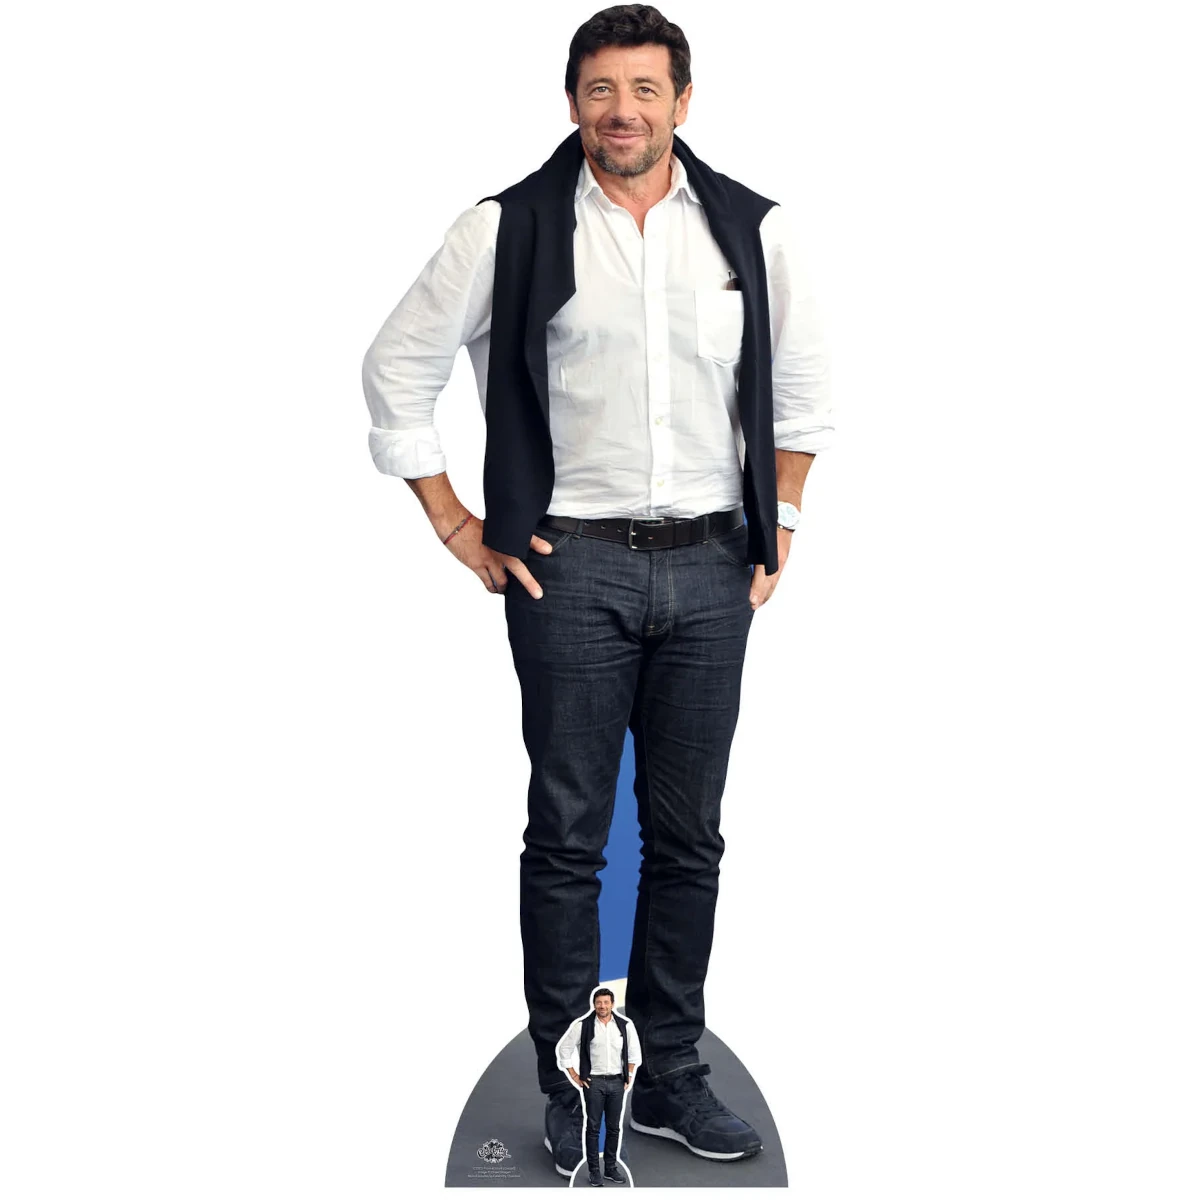 CS921 Patrick Bruel 'Casual' (French SingerSongwriter) Lifesize + Mini Cardboard Cutout Standee Front